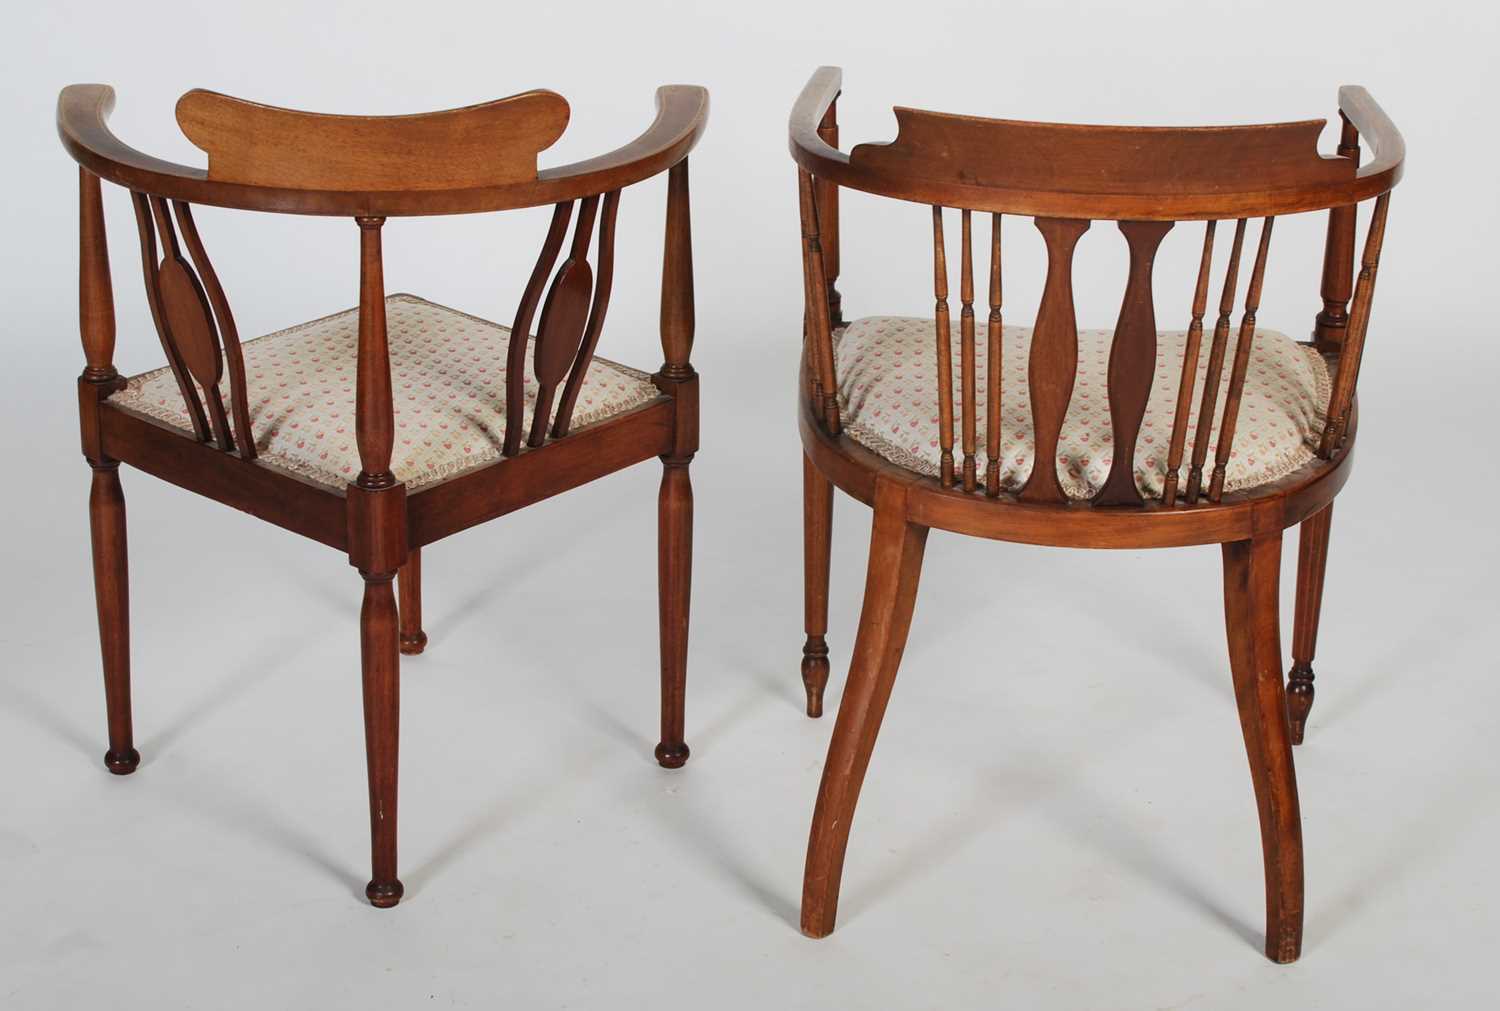 Two Edwardian mahogany chairs, one a horseshoe back armchair with vertical spindle gallery, floral - Image 9 of 9